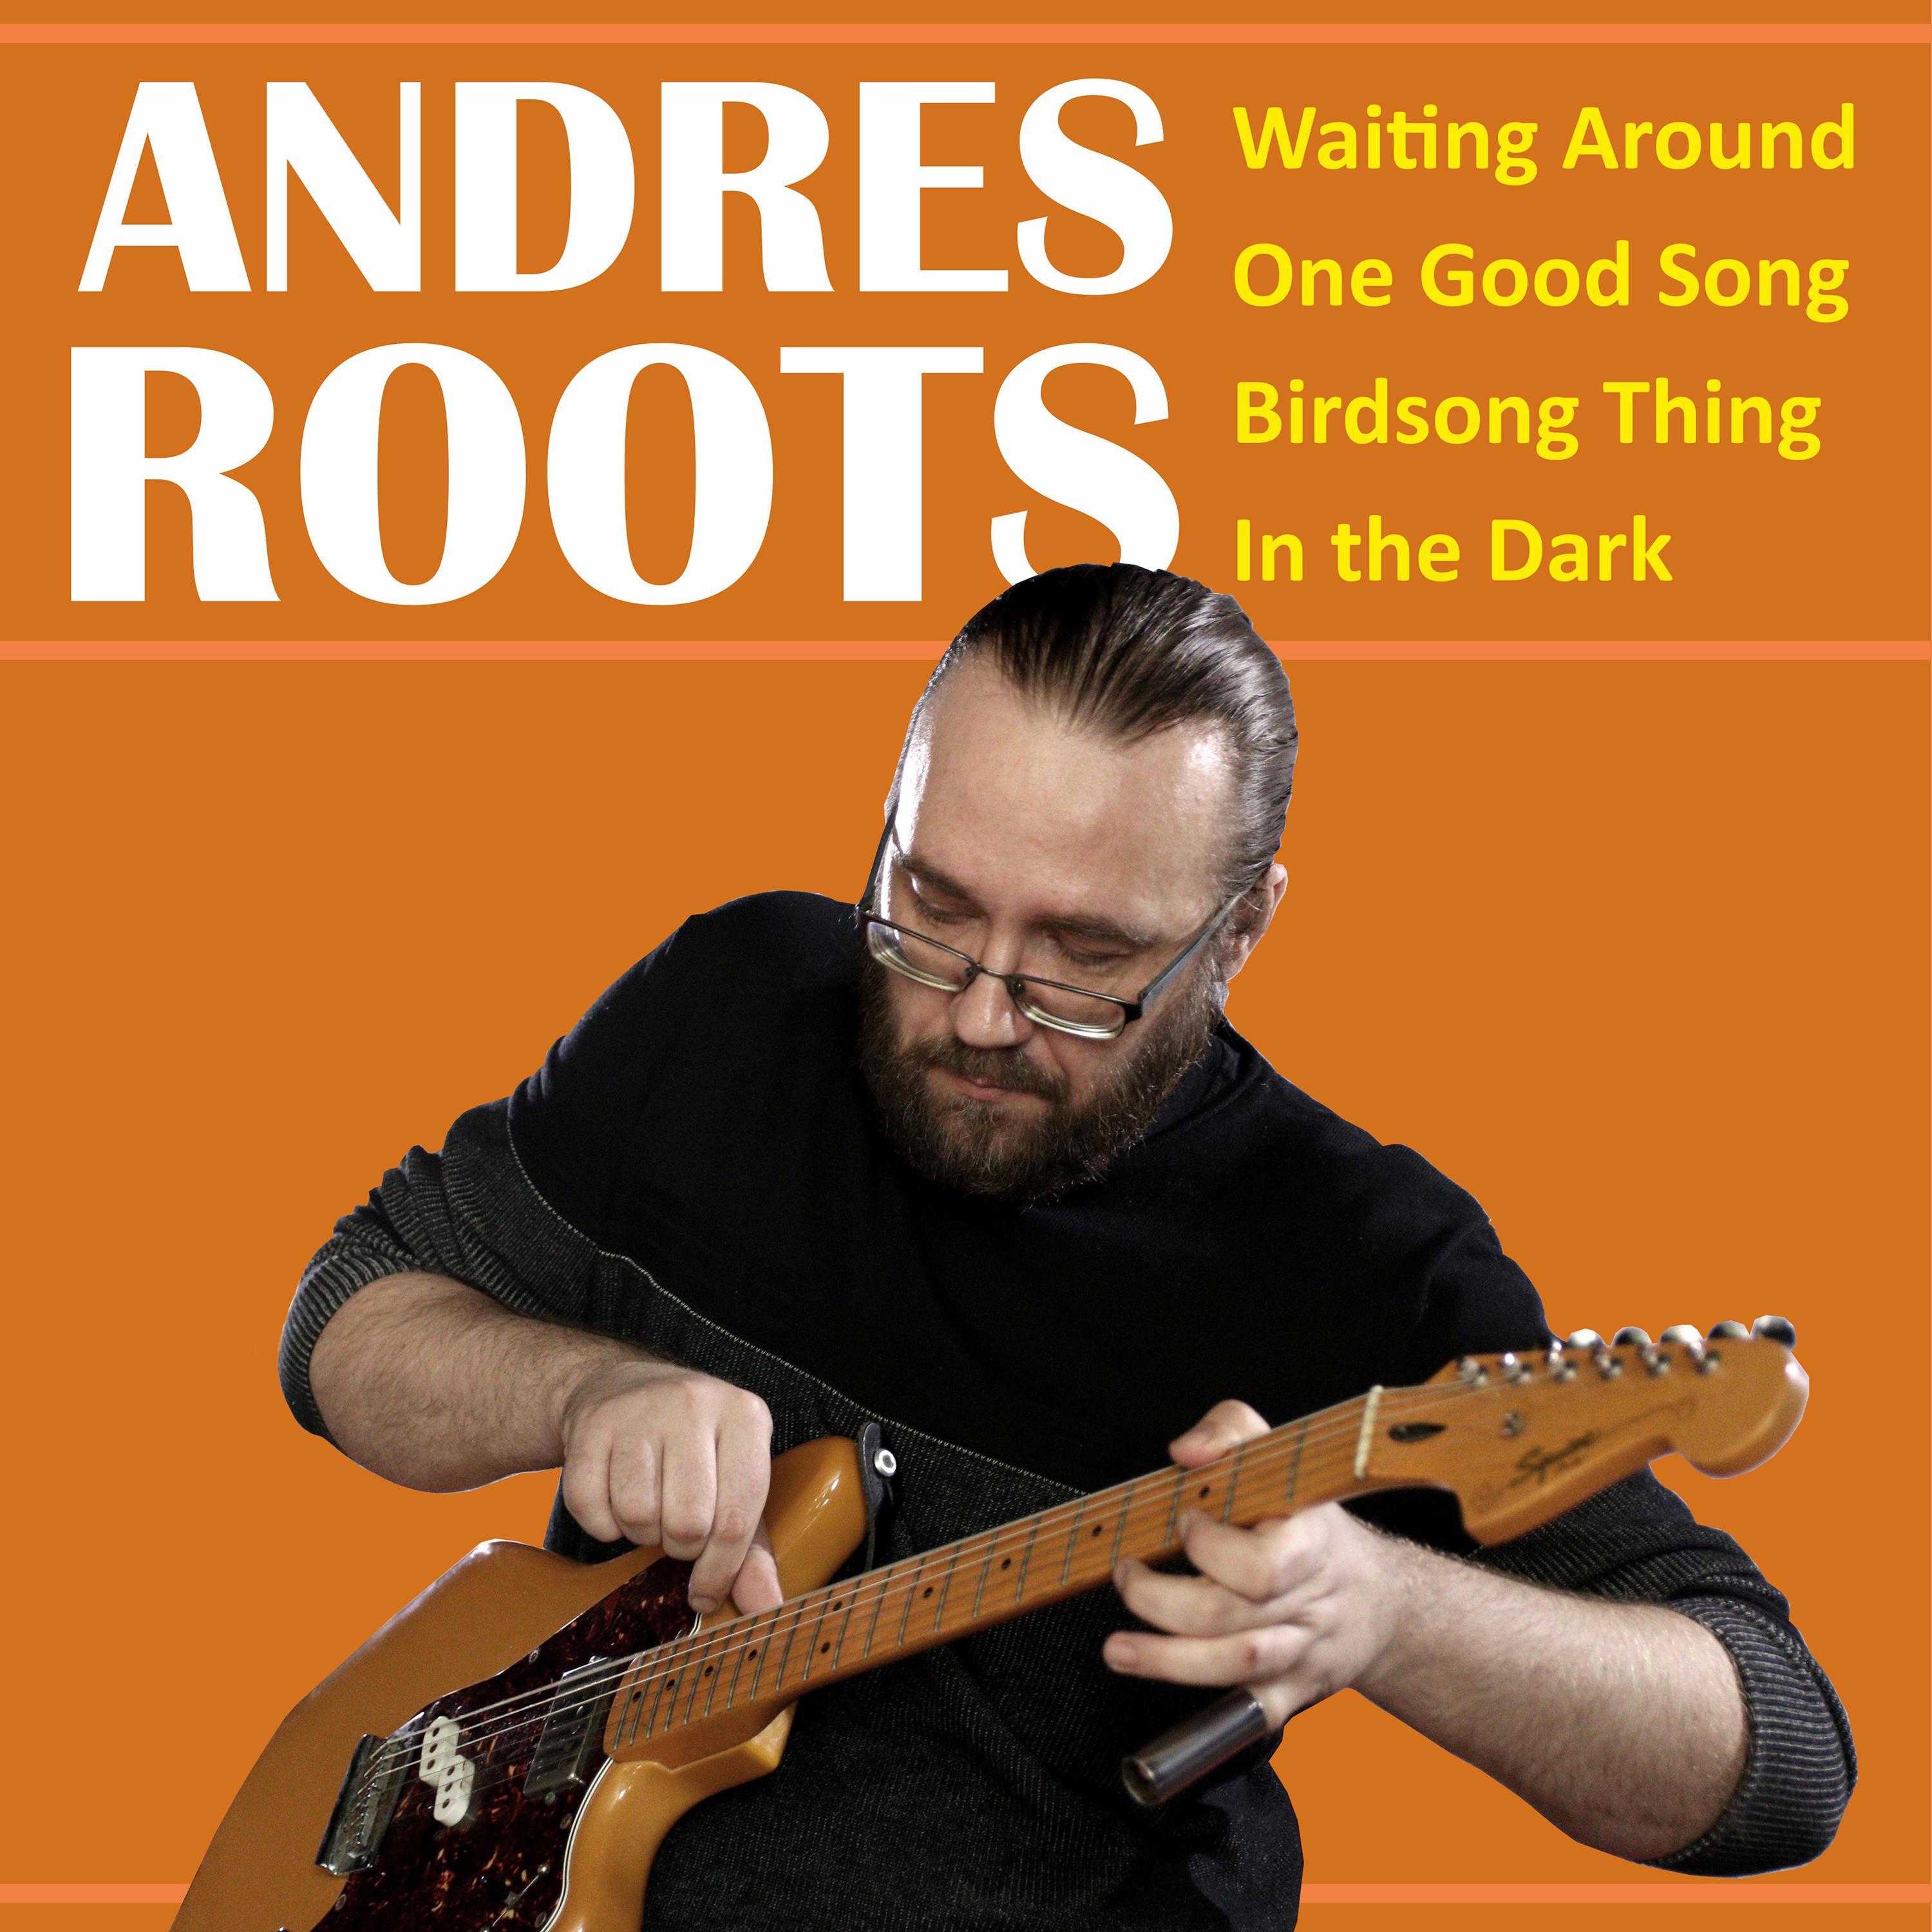 ANDRES ROOTS - WAITING AROUND EP